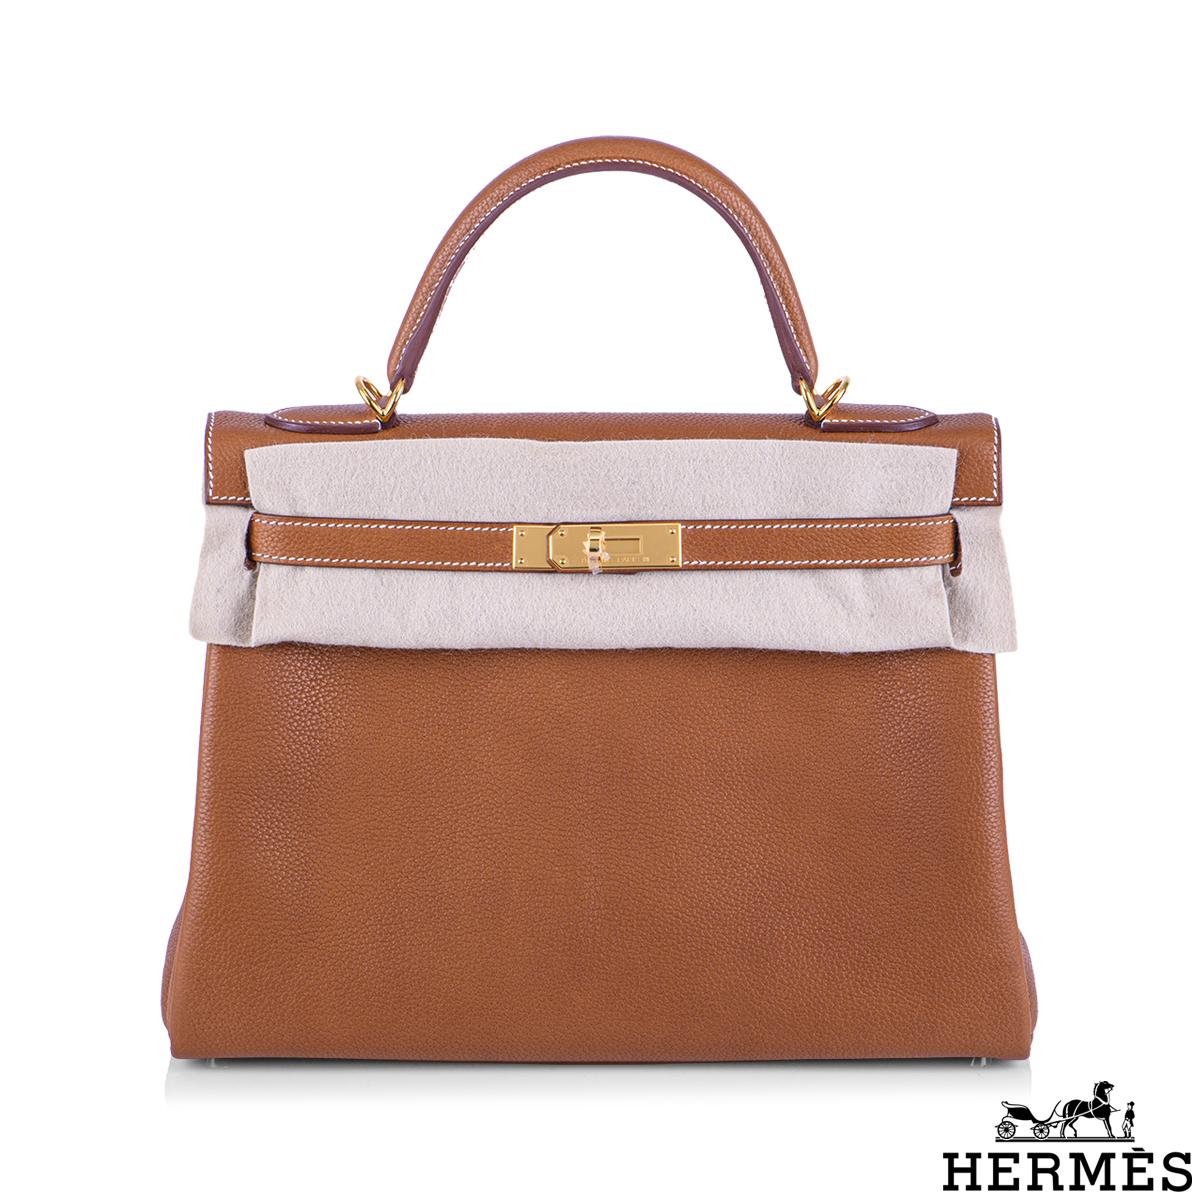 An exquisite and rare Hermés 32cm Kelly bag. The exterior of this Kelly features a Retourne style in rare Fauve Barenia Faubourg  leather. Fauve Barenia Faubourg is a new lightly grained version of the original Barenia leather by Hermés. The leather